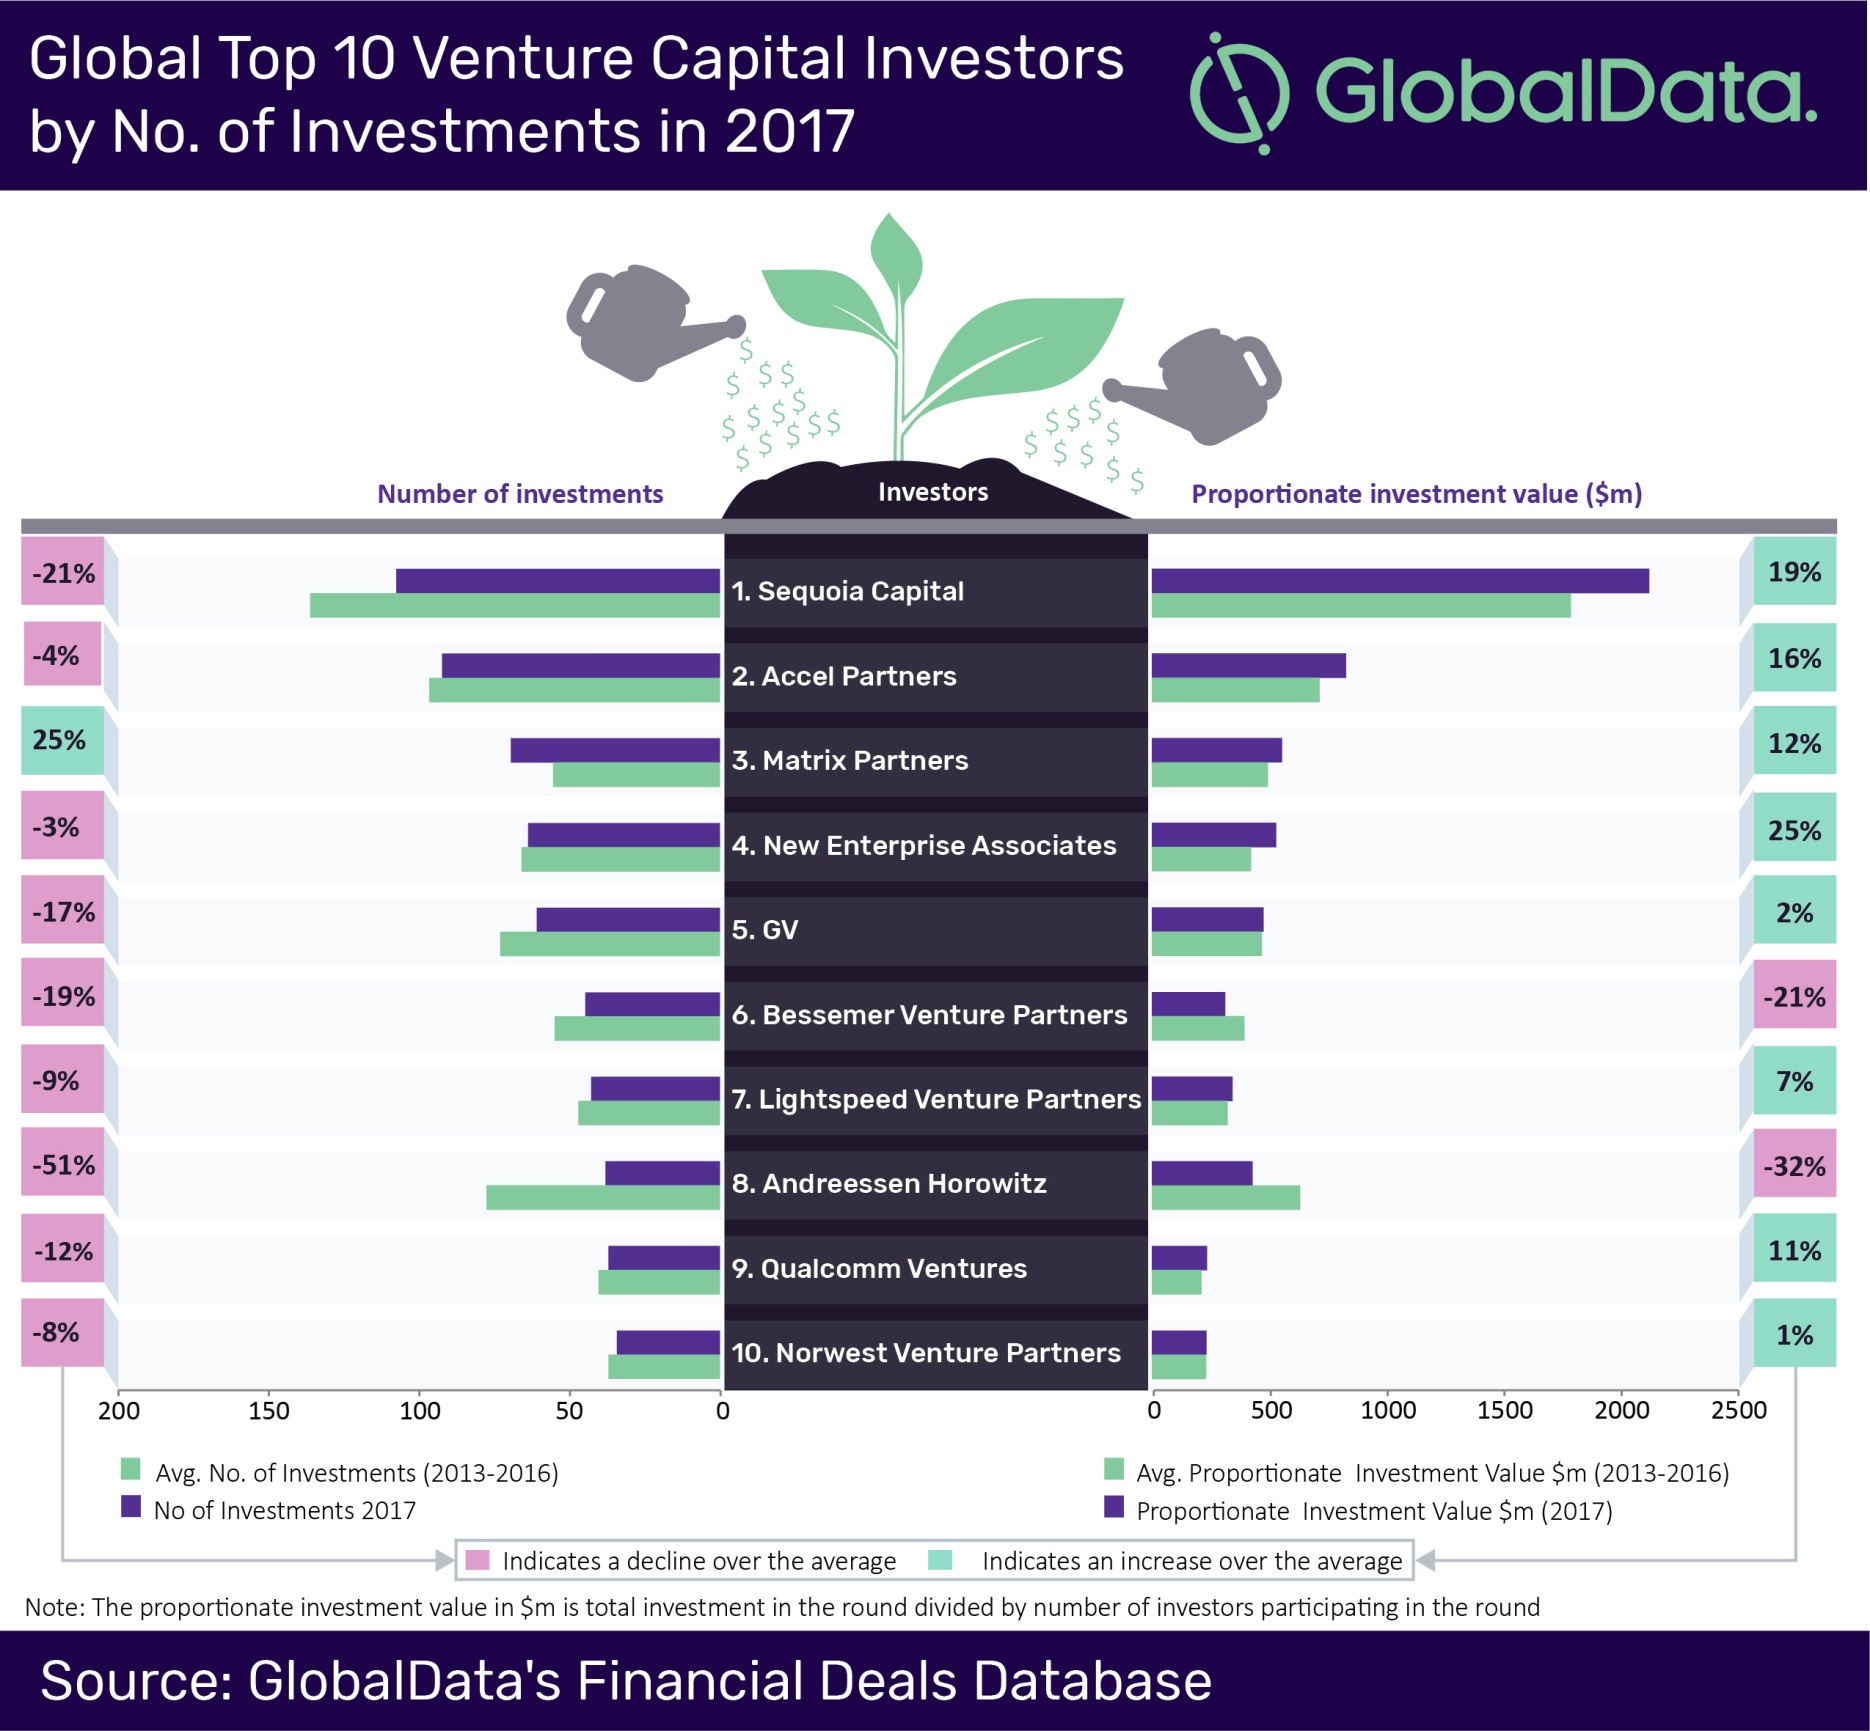 Top 10 VCs investing more money on fewer deals in 2017, says GlobalData